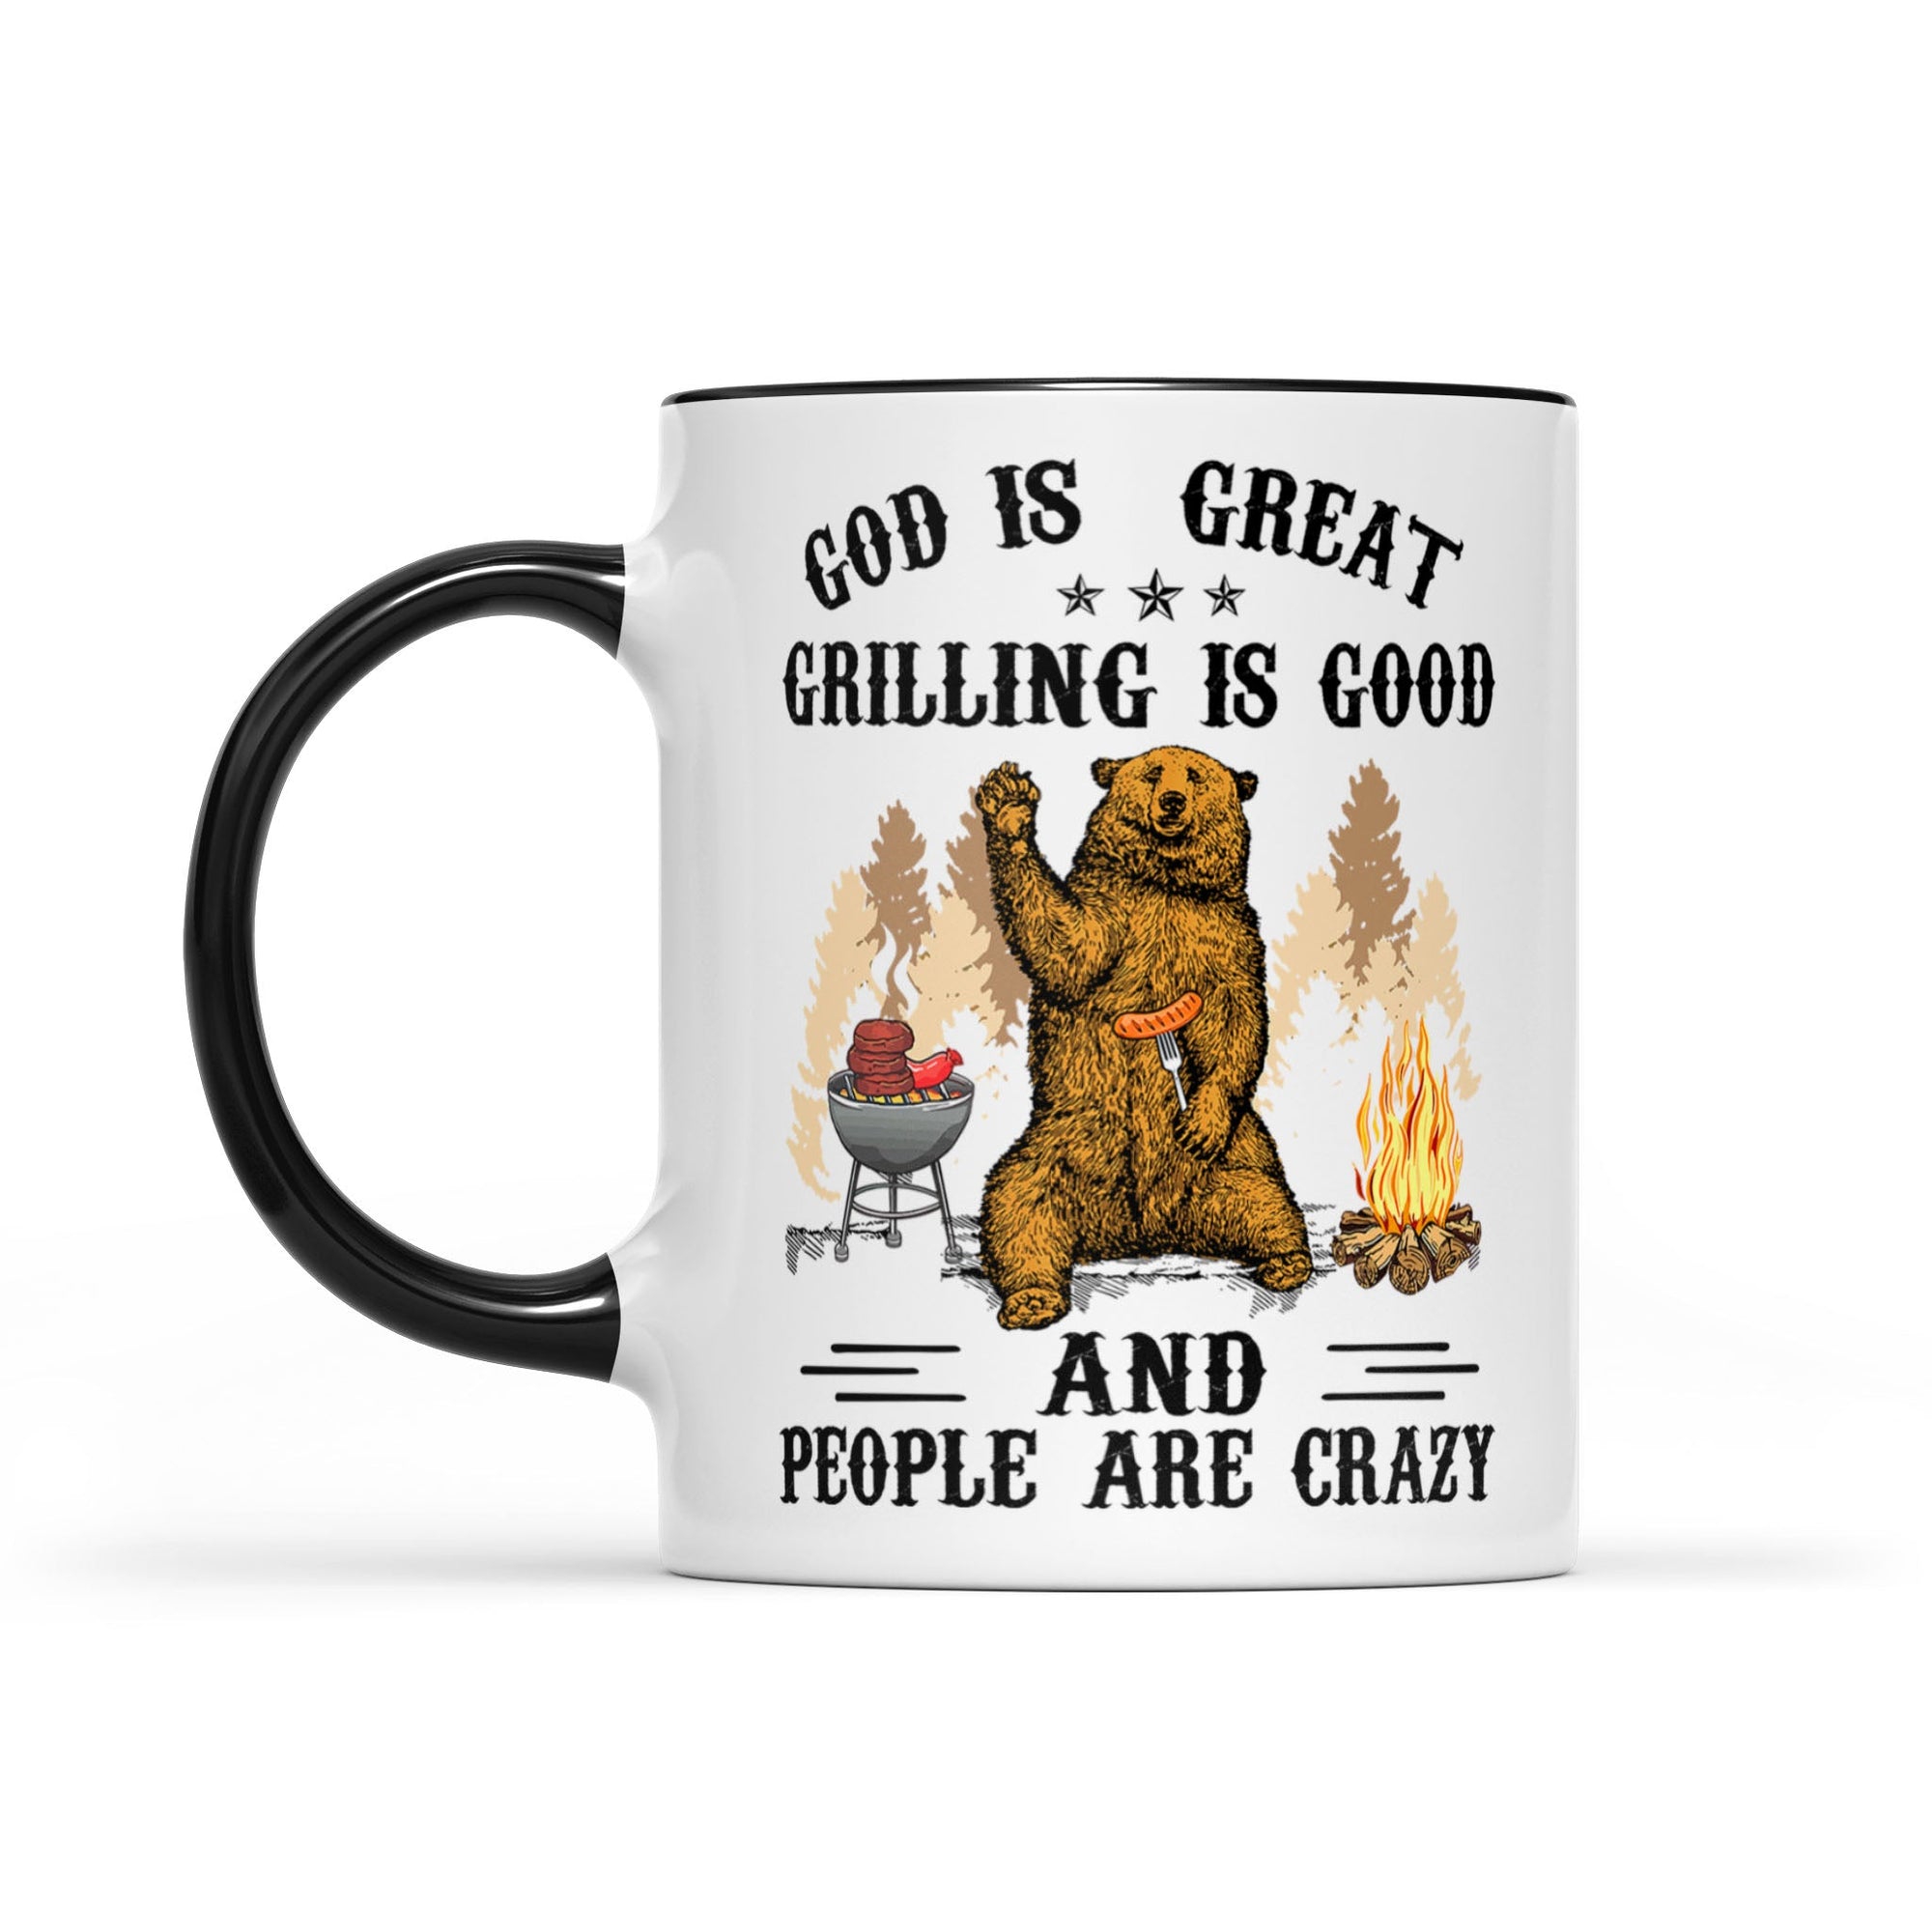 God is great grilling is good and people are crazy Accent Mug